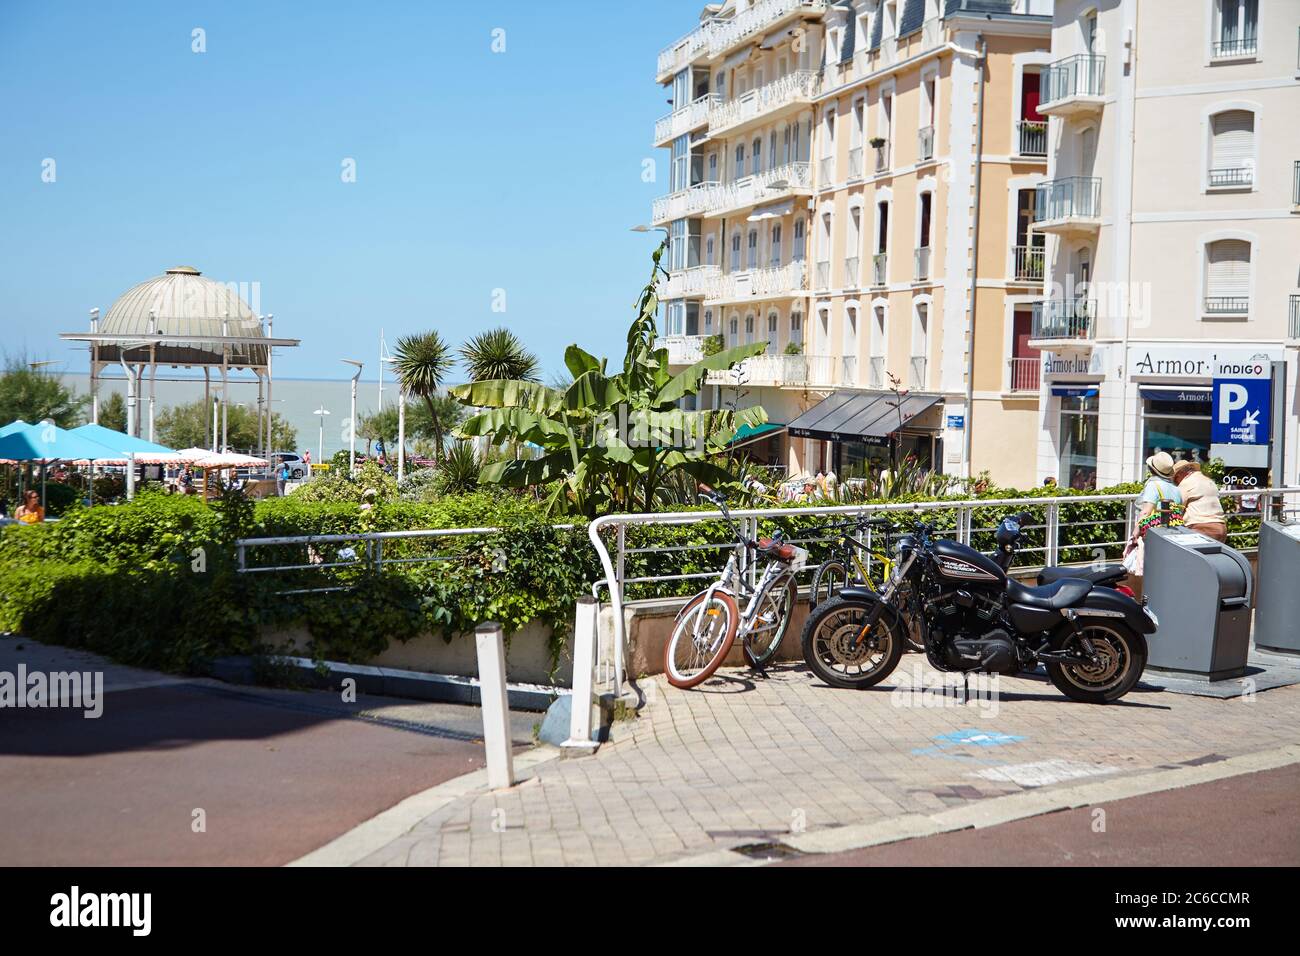 Biarritz, France - June 17, 2018: Rue Mazagran. Bicycle and motorcycle parked on the street Stock Photo